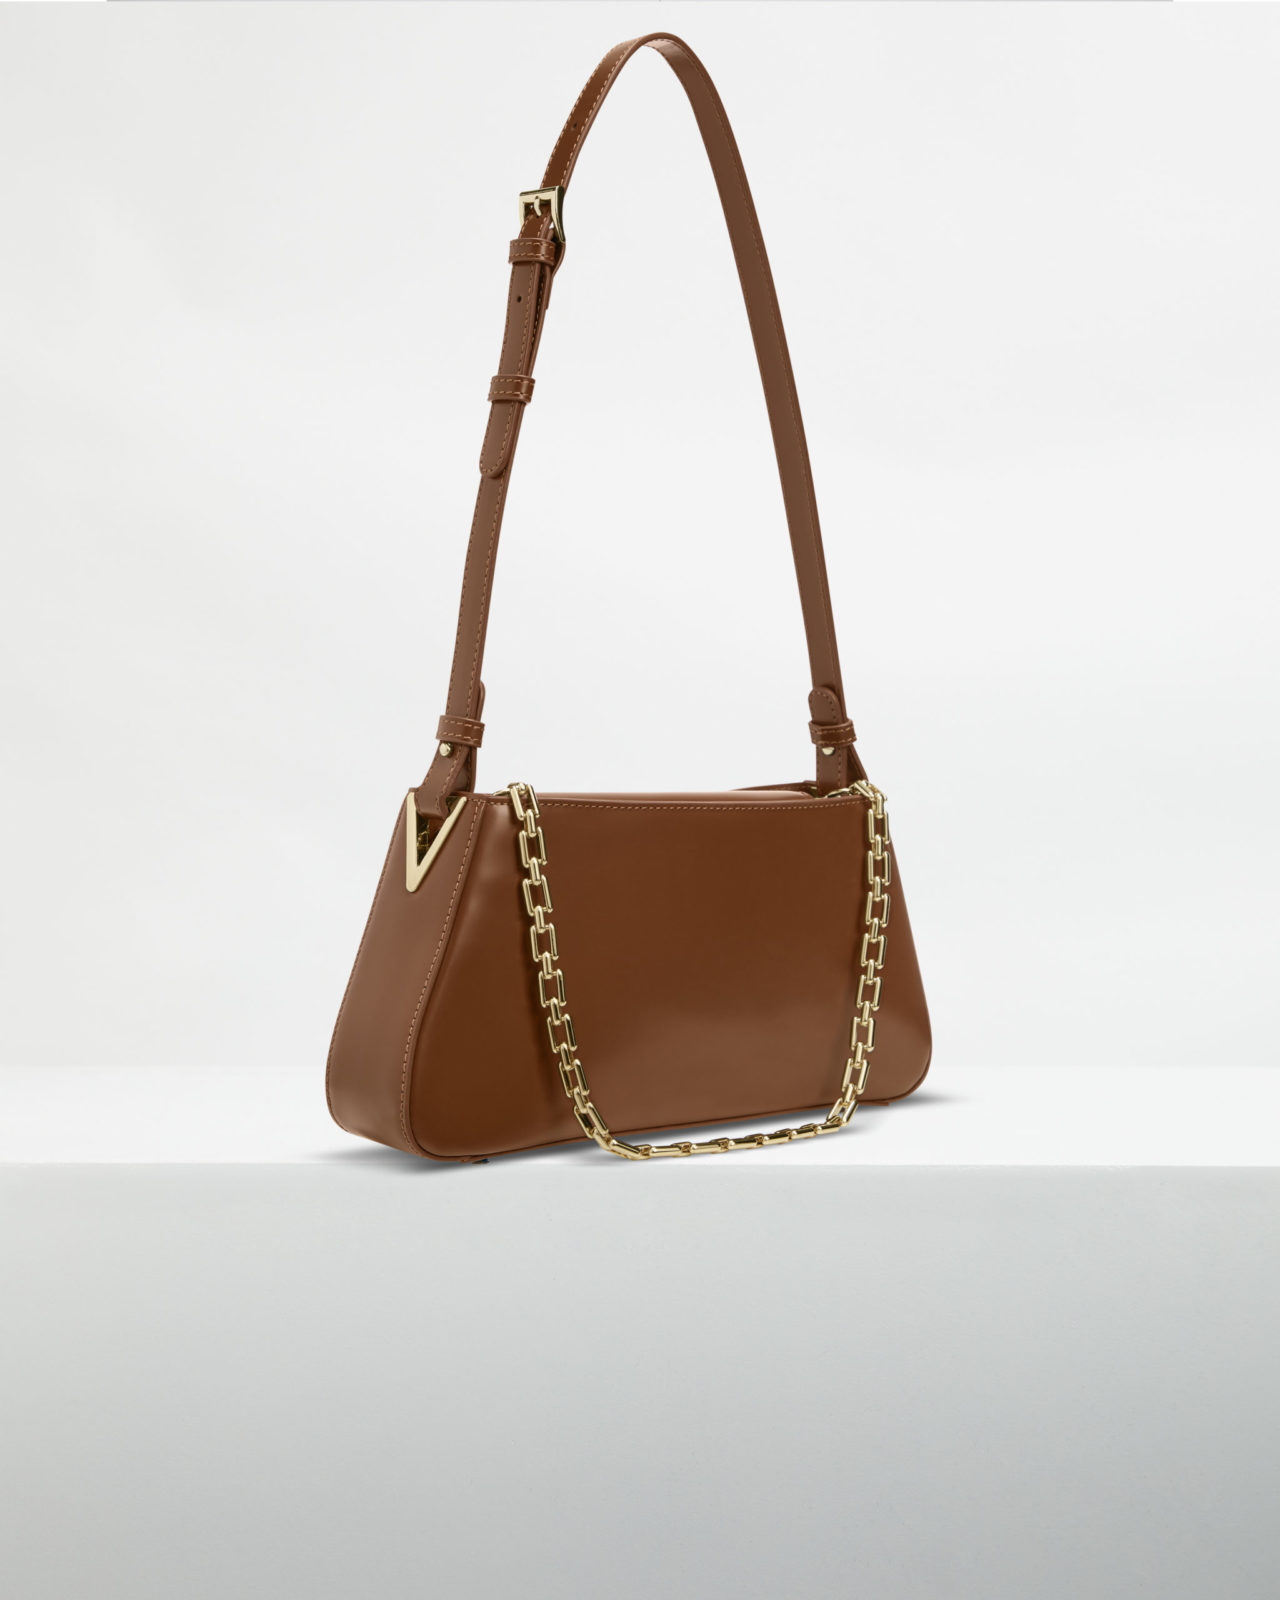 An elevated eCommerce handbag product image captured by I Heart Studios.